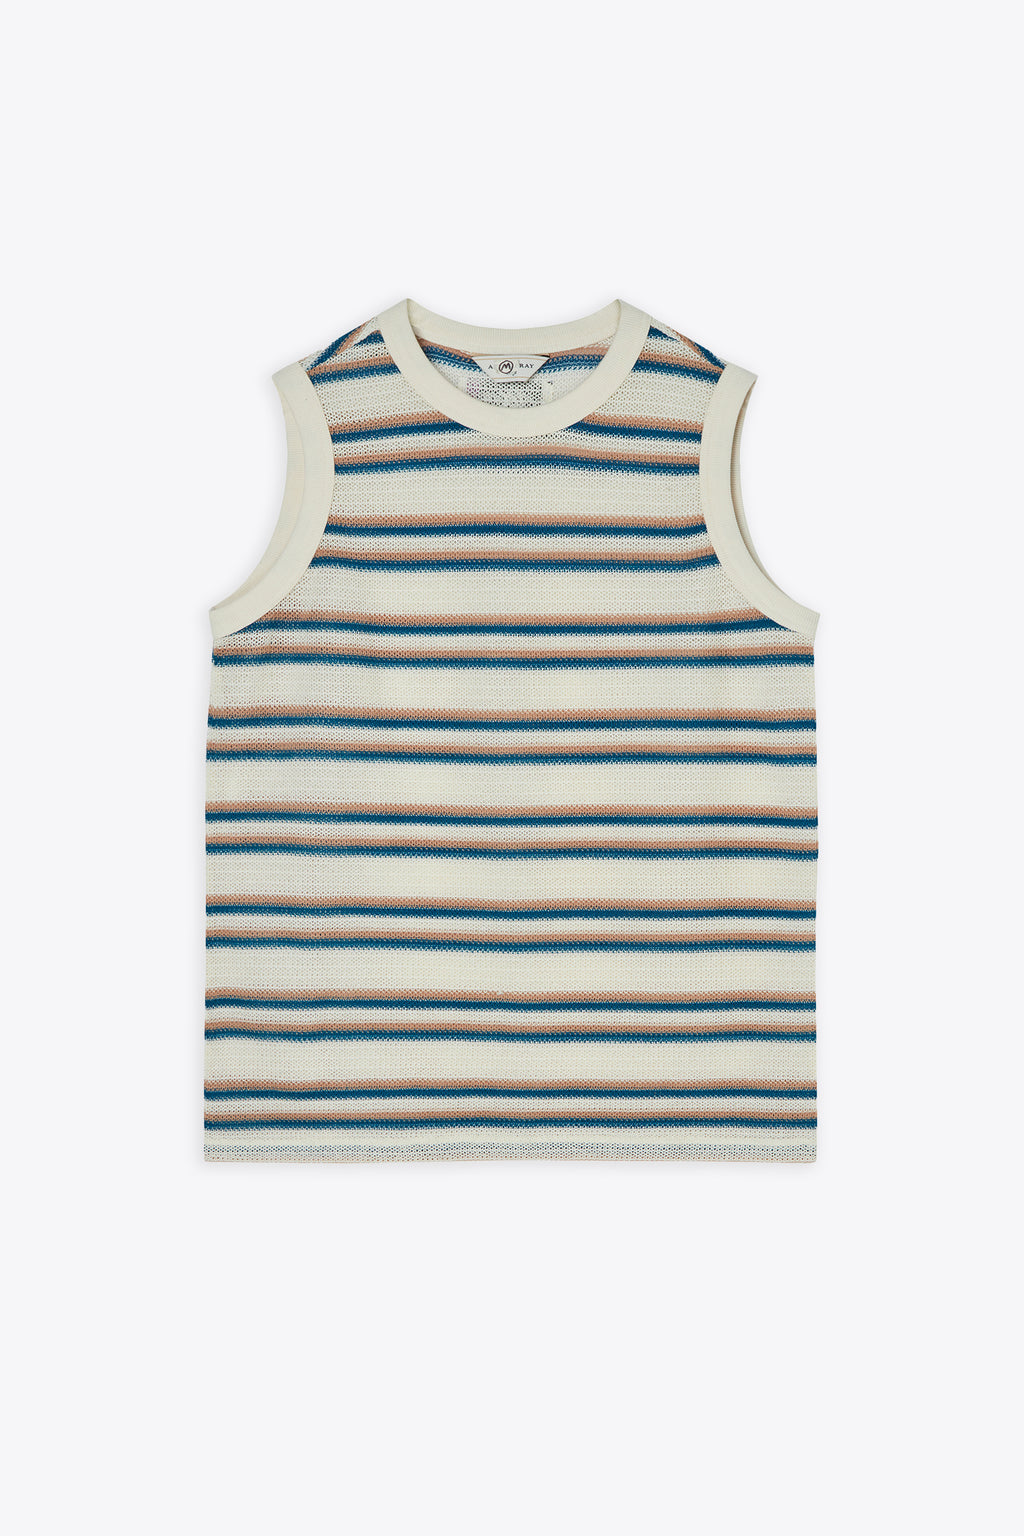 alt-image__Ivory-striped-mesh-knitted-sleeveless-t-shirt---Knitting-Mesh-Sleeveless-T-shirt